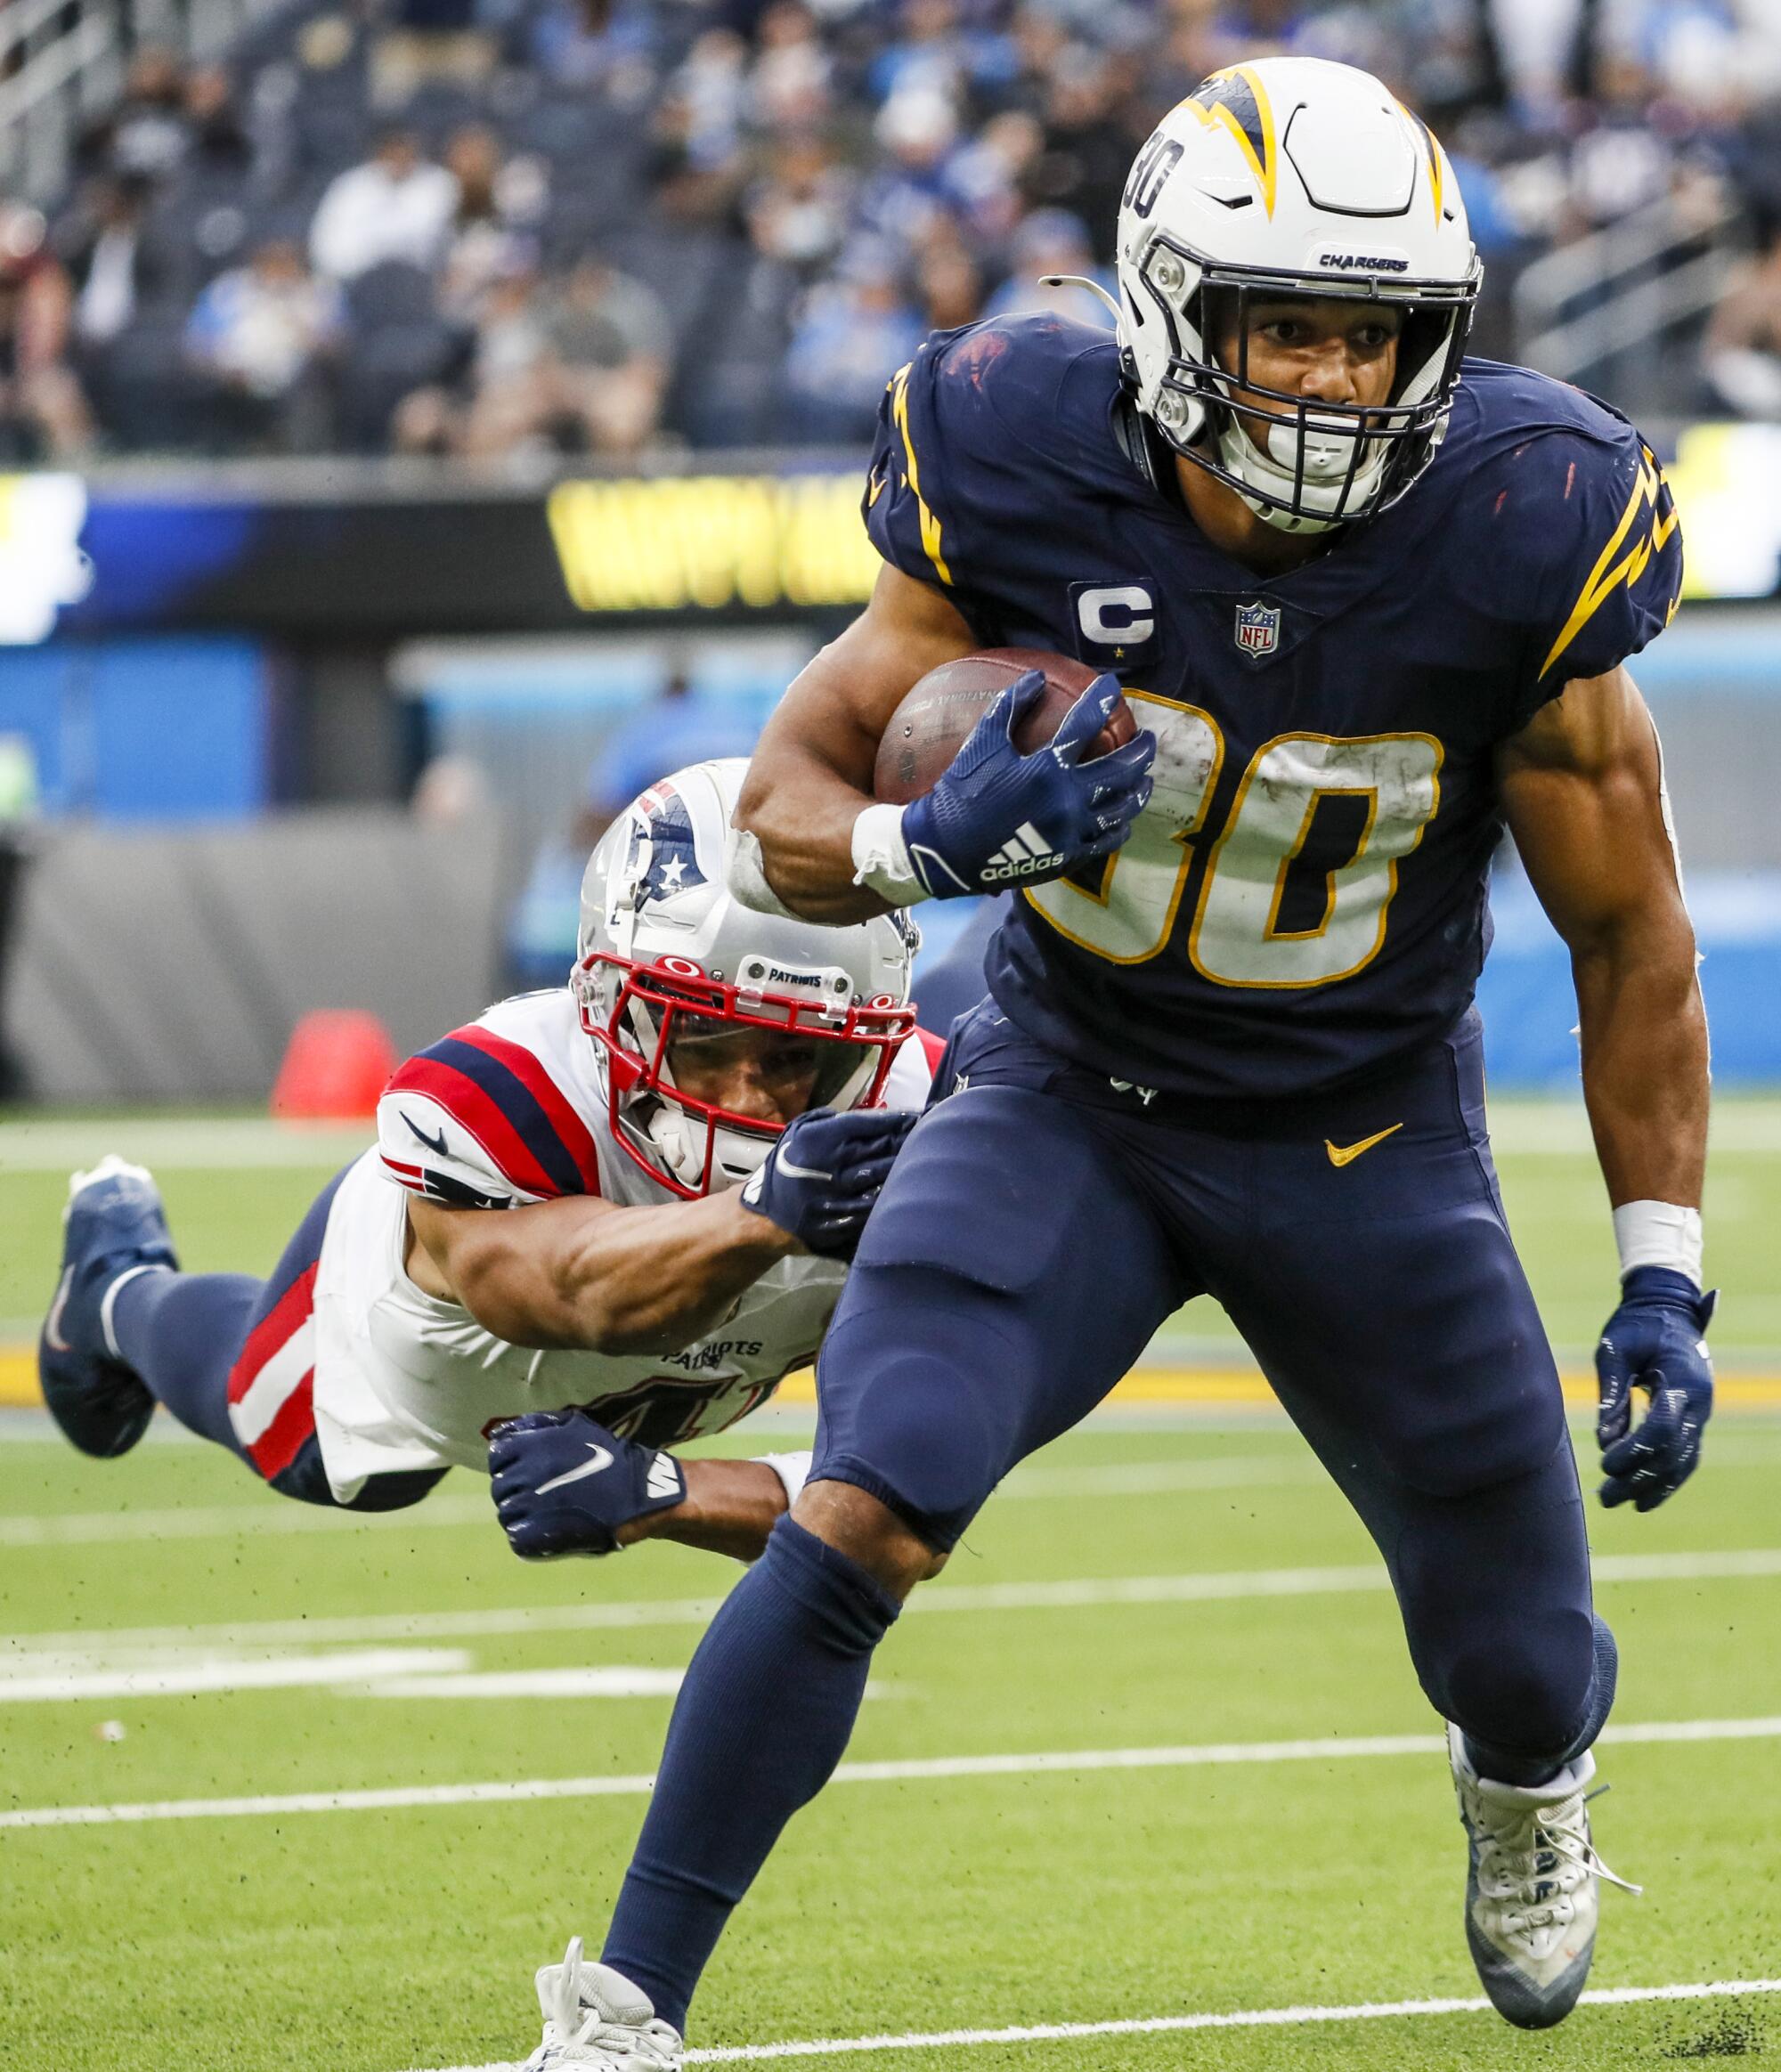 Chargers running back Austin Ekeler shakes a diving tackle attempt by New England Patriots cornerback Myles Bryant.